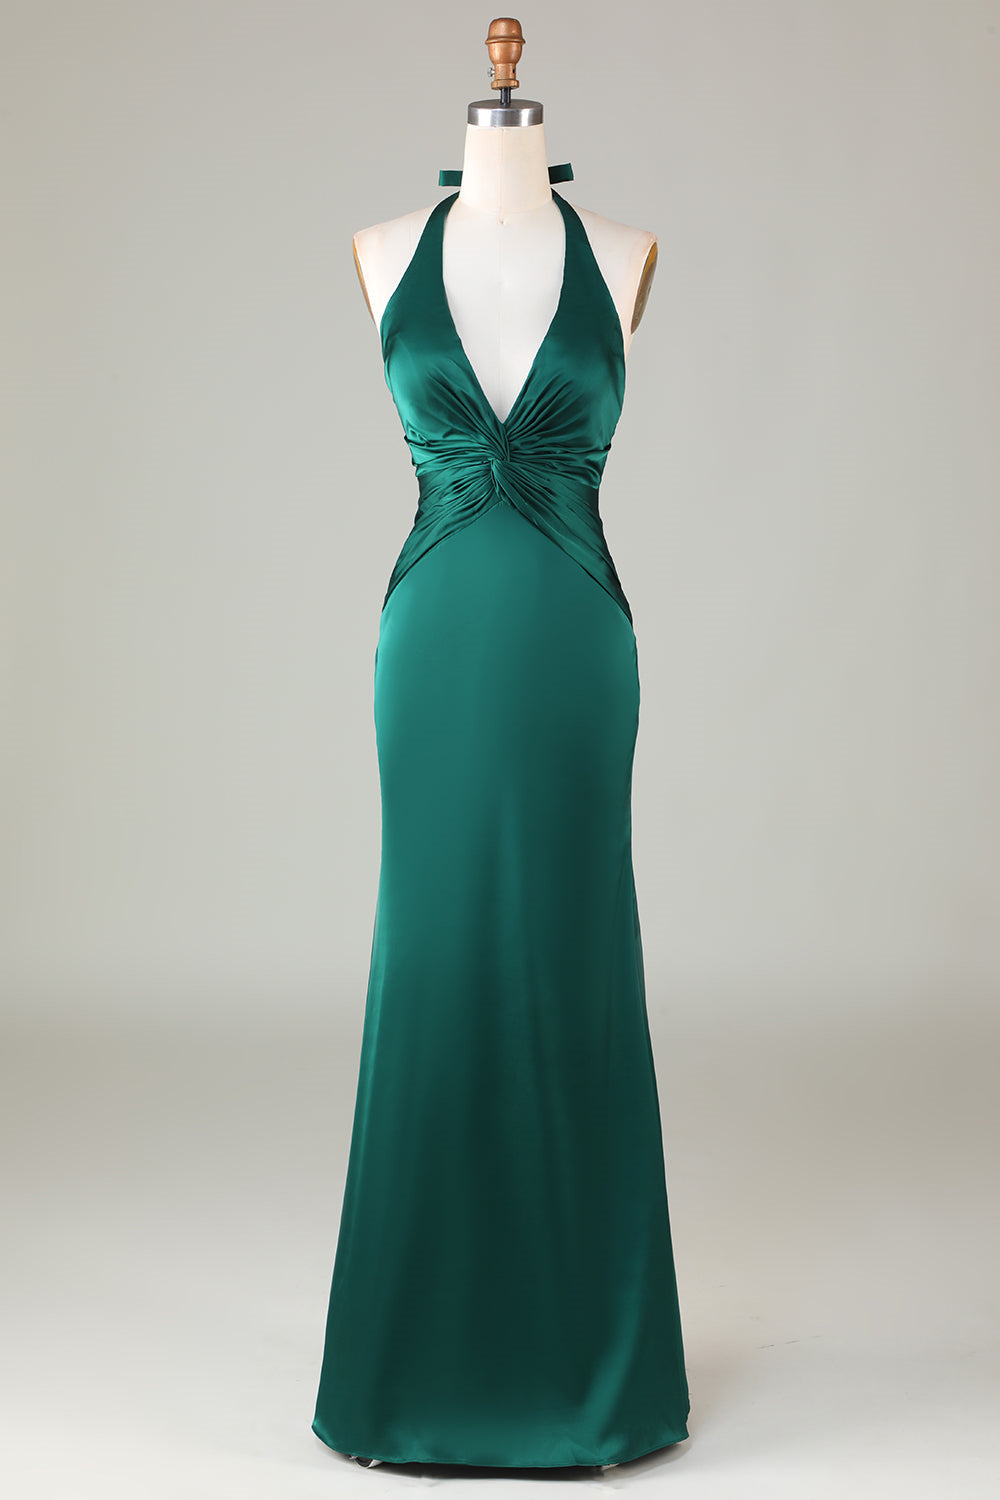 Homecomeing Dresses Vintage, Halter Emerald Green Ruched Mermaid Bridesmaid Dress